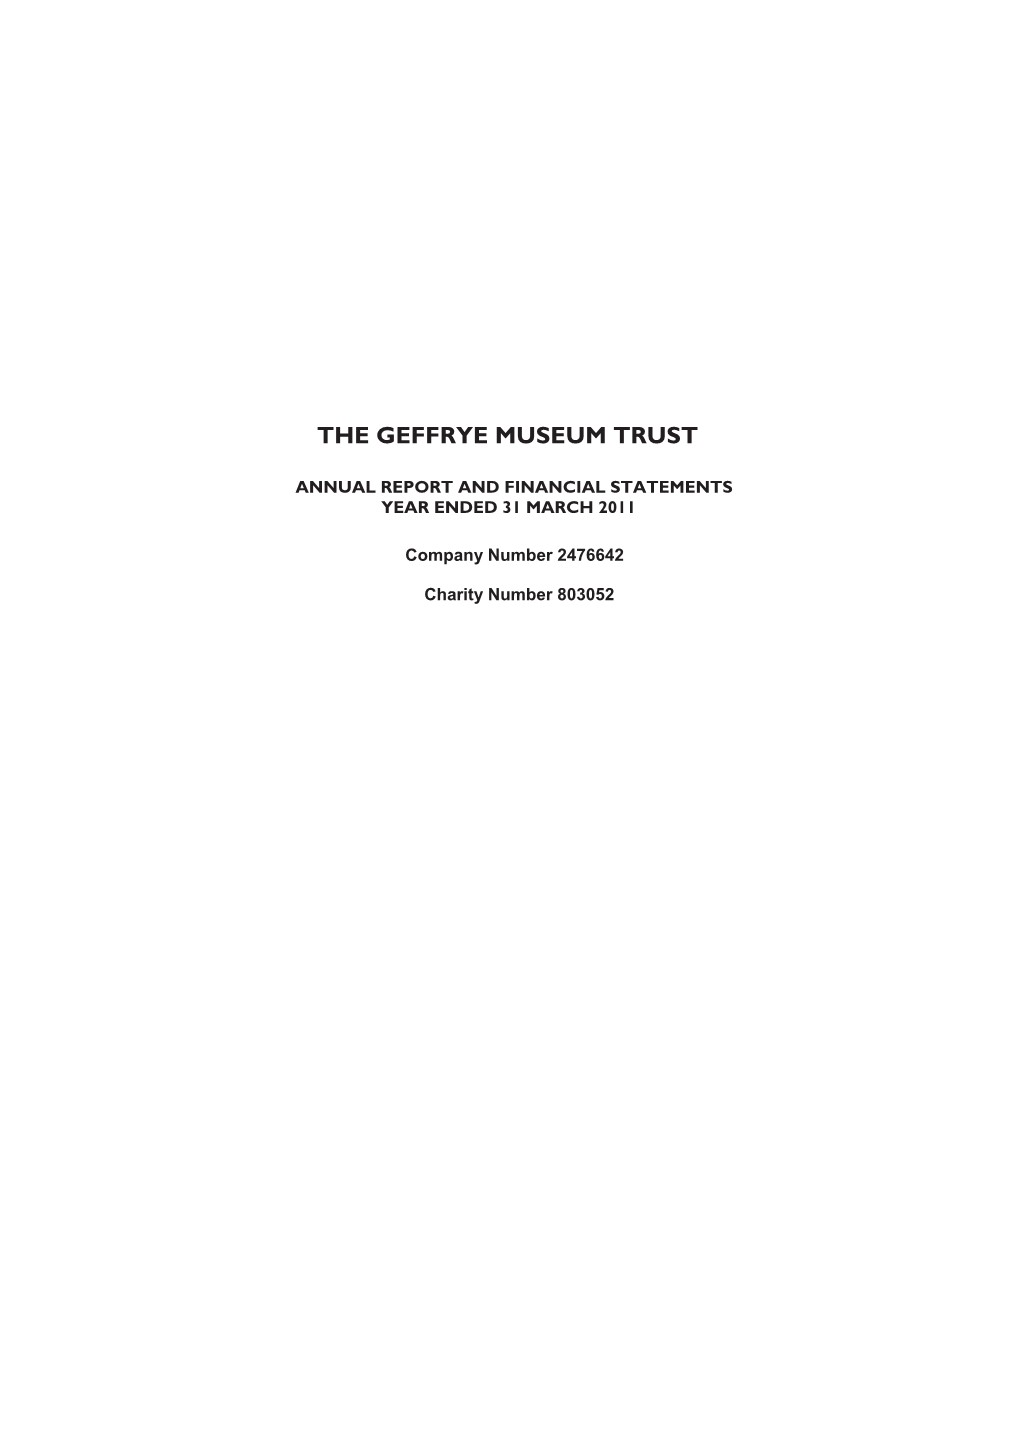 The Geffrye Museum Trust Annual Report and Financial Statements Year Ended 31 March 2011